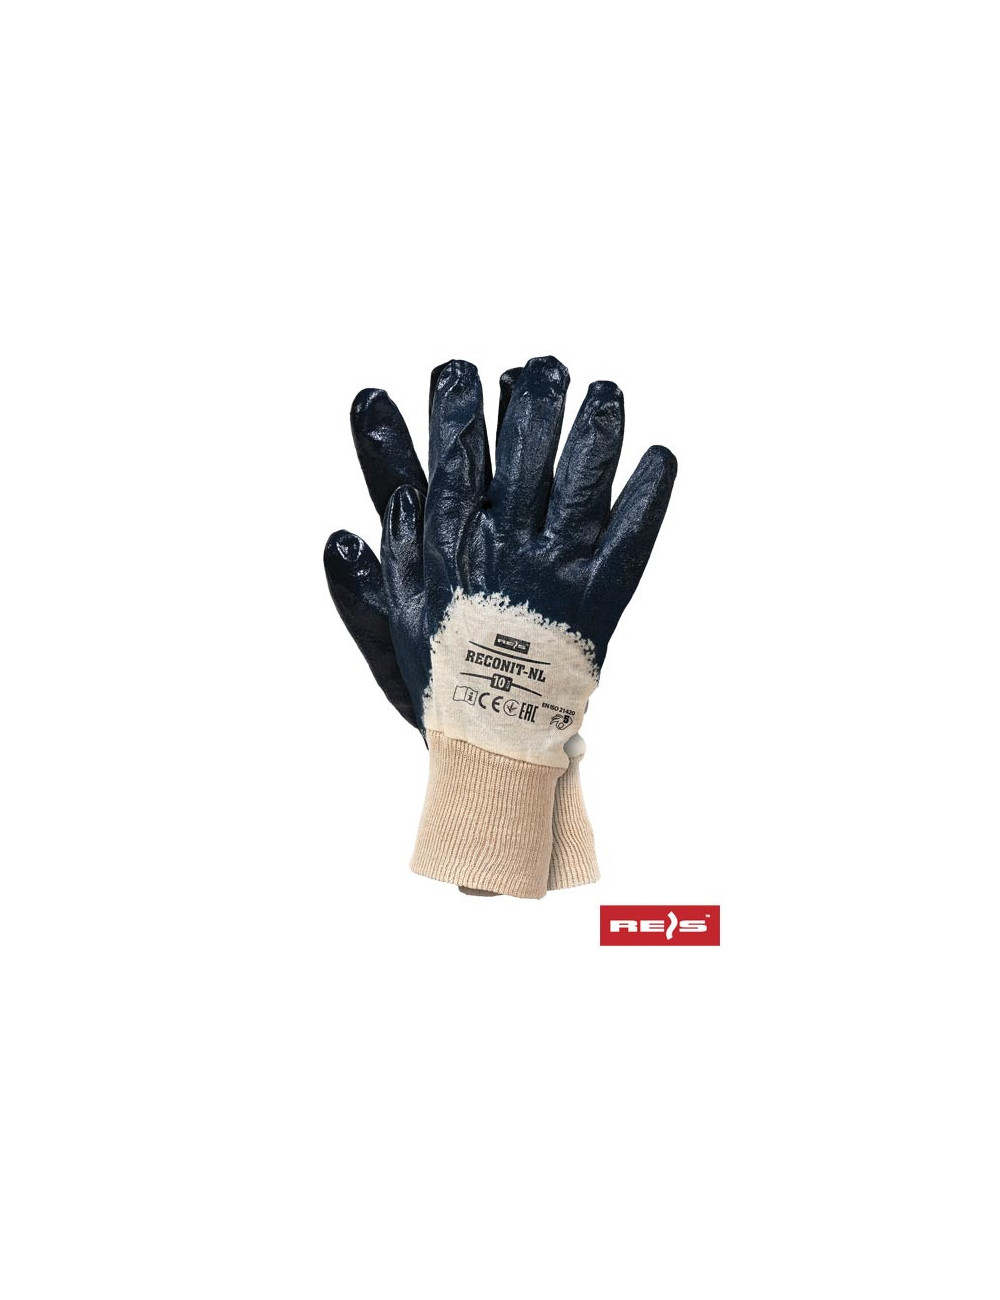 Protective gloves reconit-nl beg beige-navy Reis